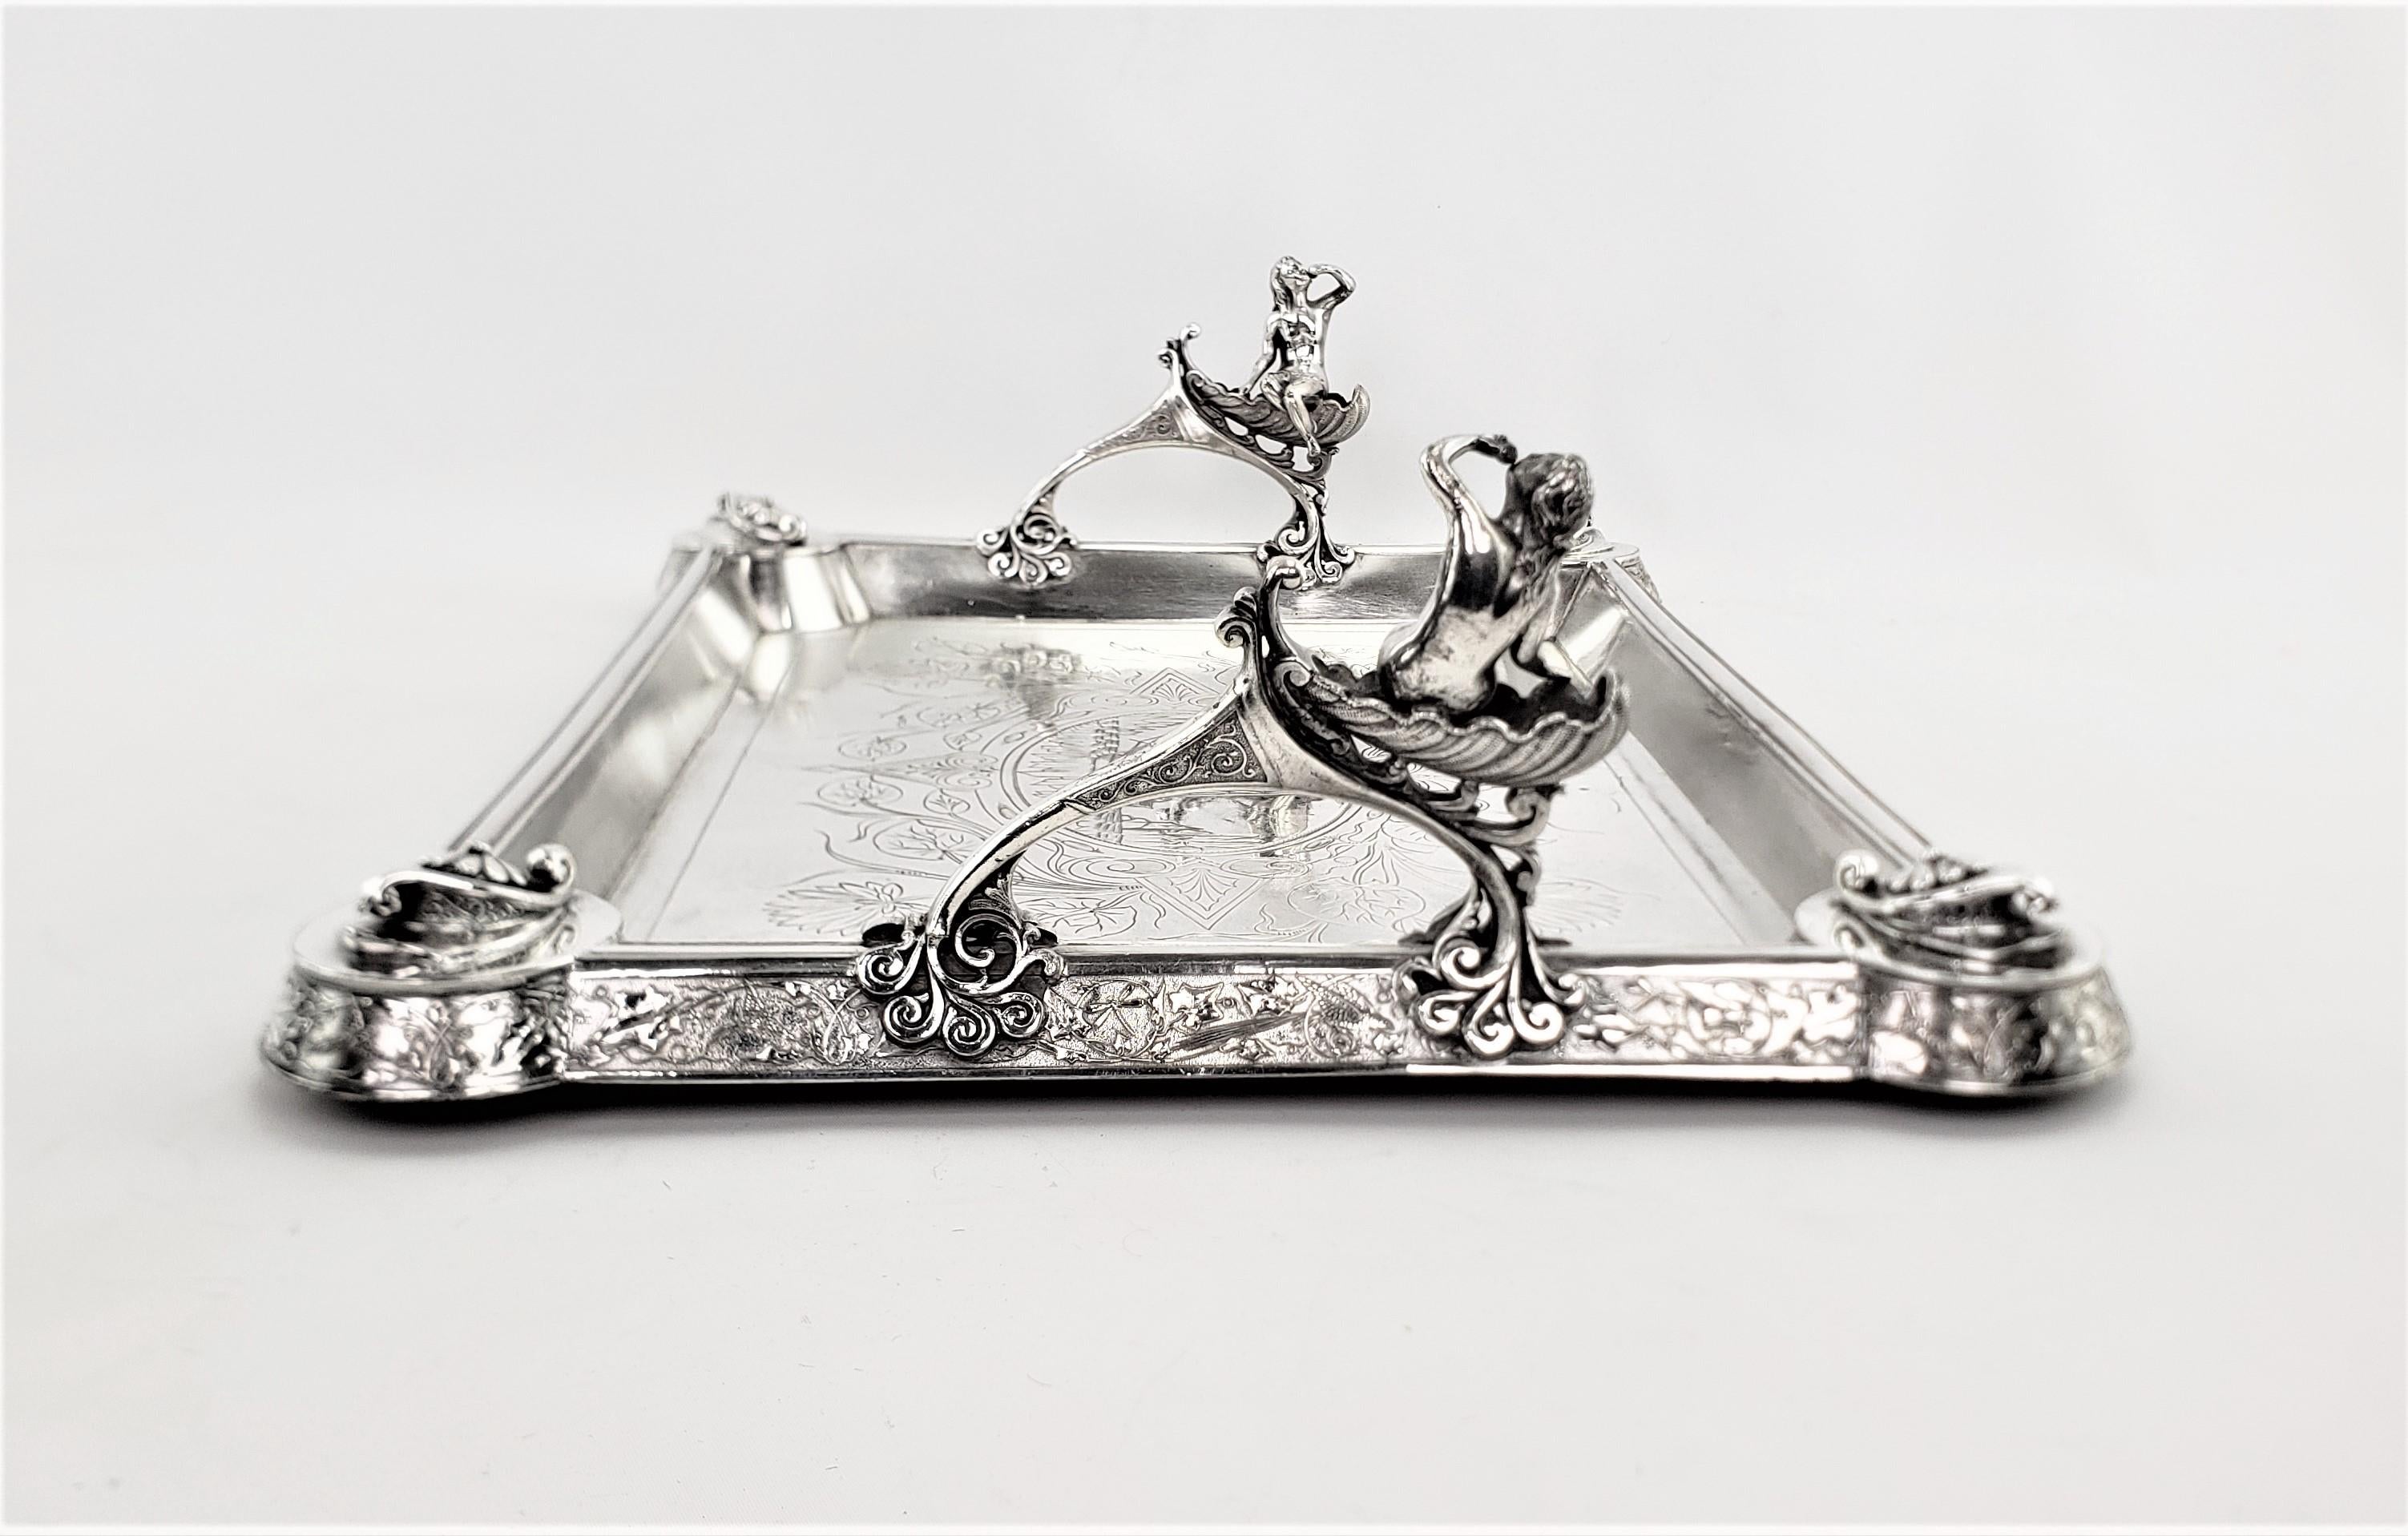 American Antique Aesthetic Movement Silver Plated Serving Tray with Figural Siren Handles For Sale